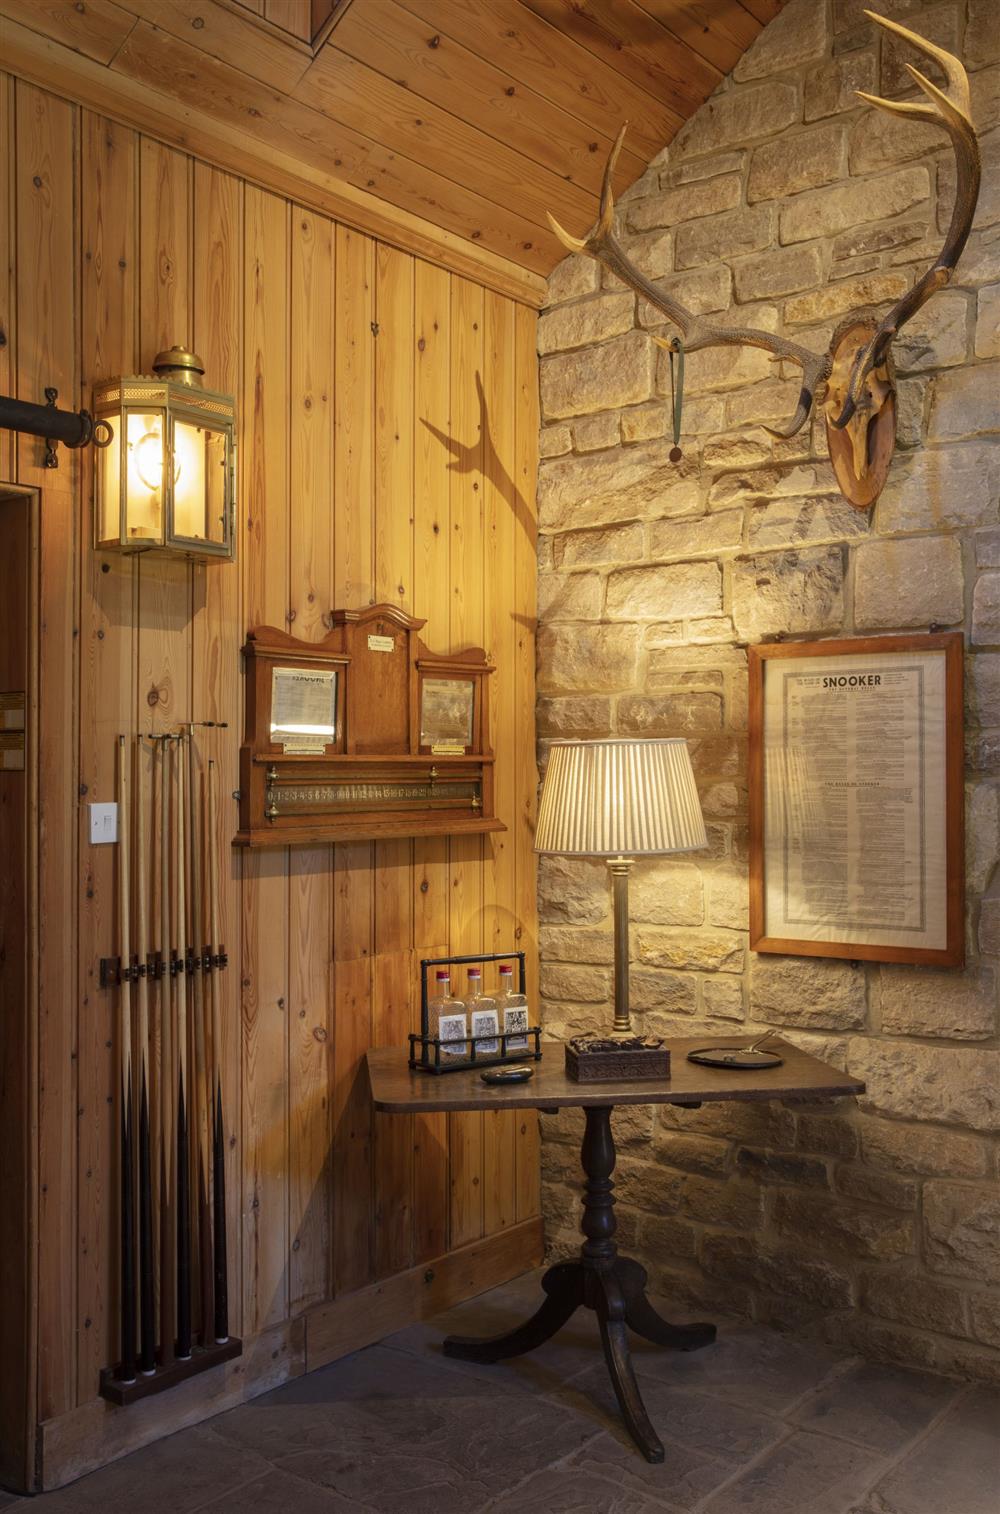 Unique features to enjoy in the Billiard Room at The Shooting Lodge, Dorset